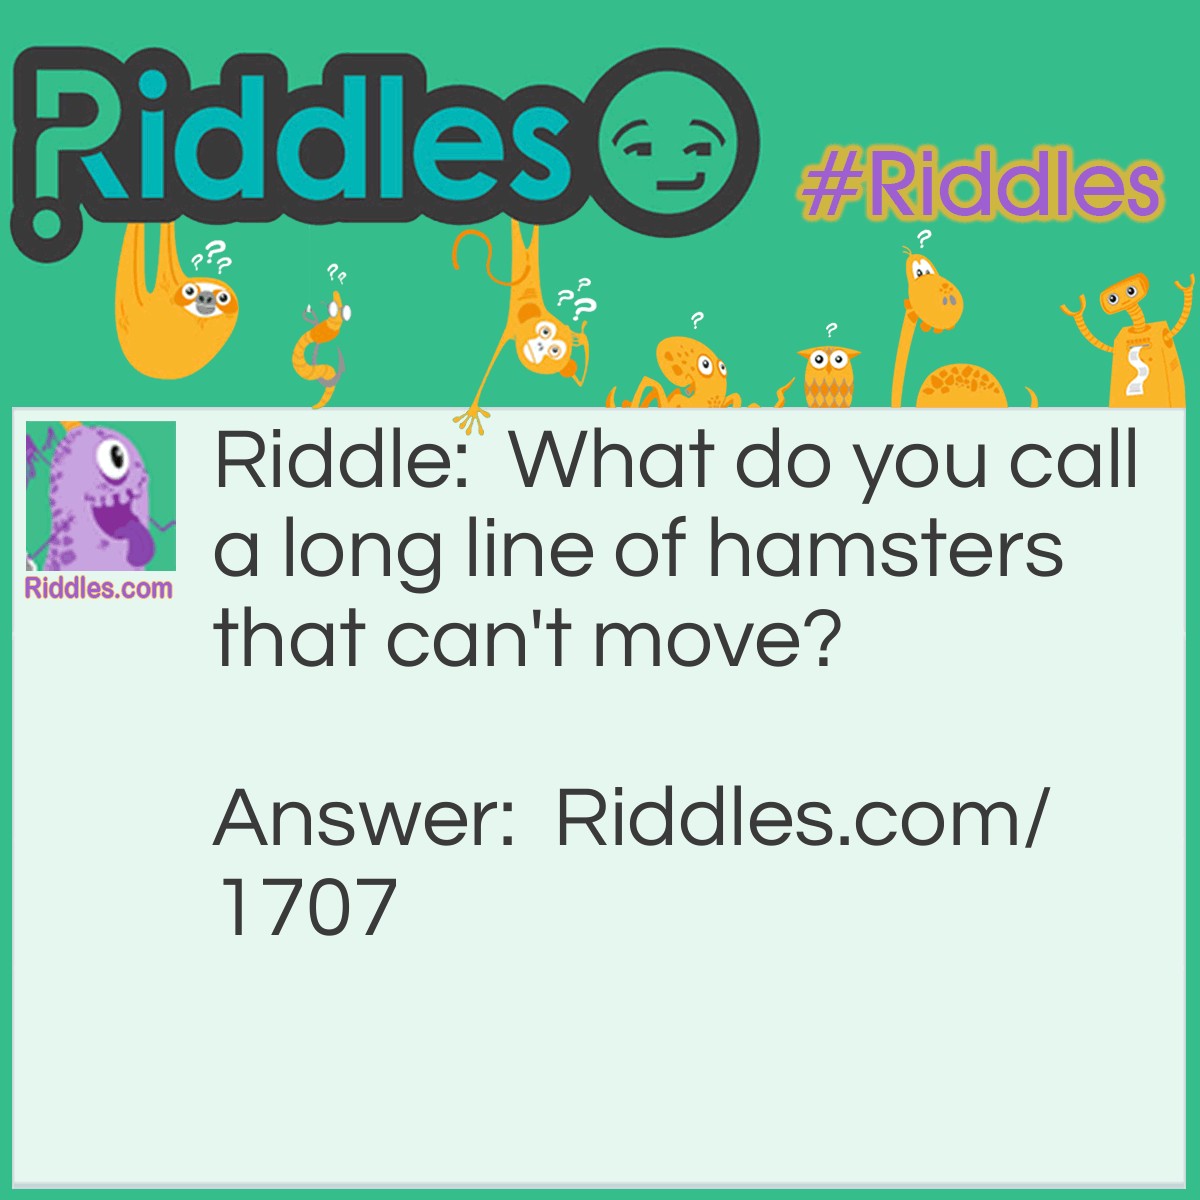 Riddle: What do you call a long line of hamsters that can't move? Answer: A hamsterjam.